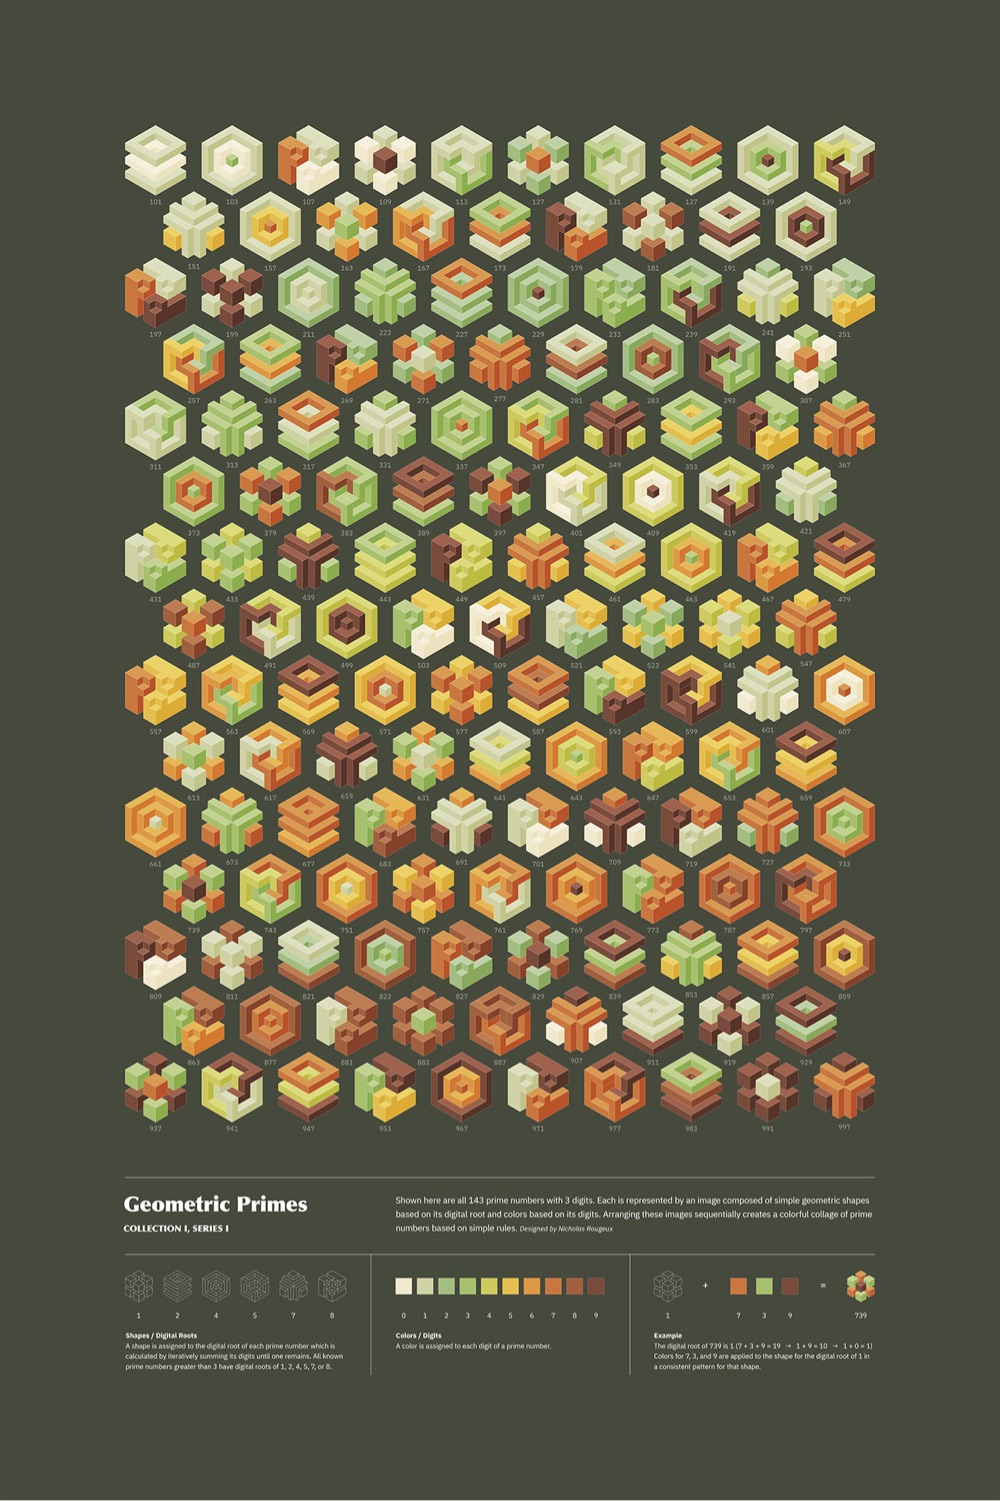 a poster that visualized prime numbers as geometric shapes